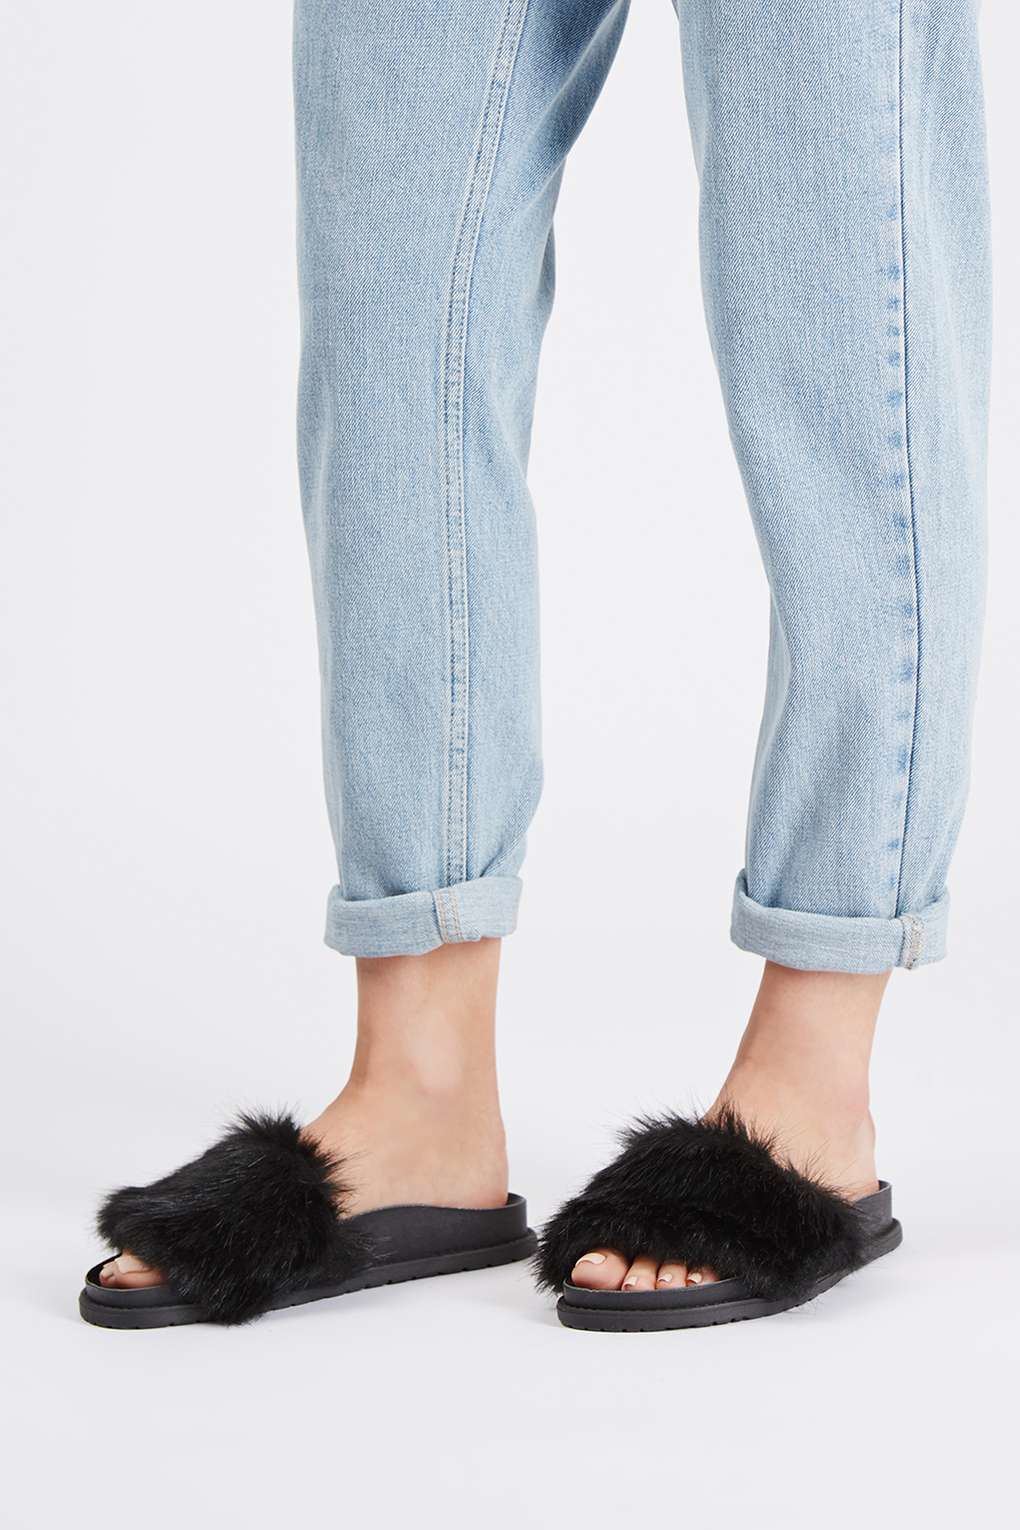 fluffy shoes topshop